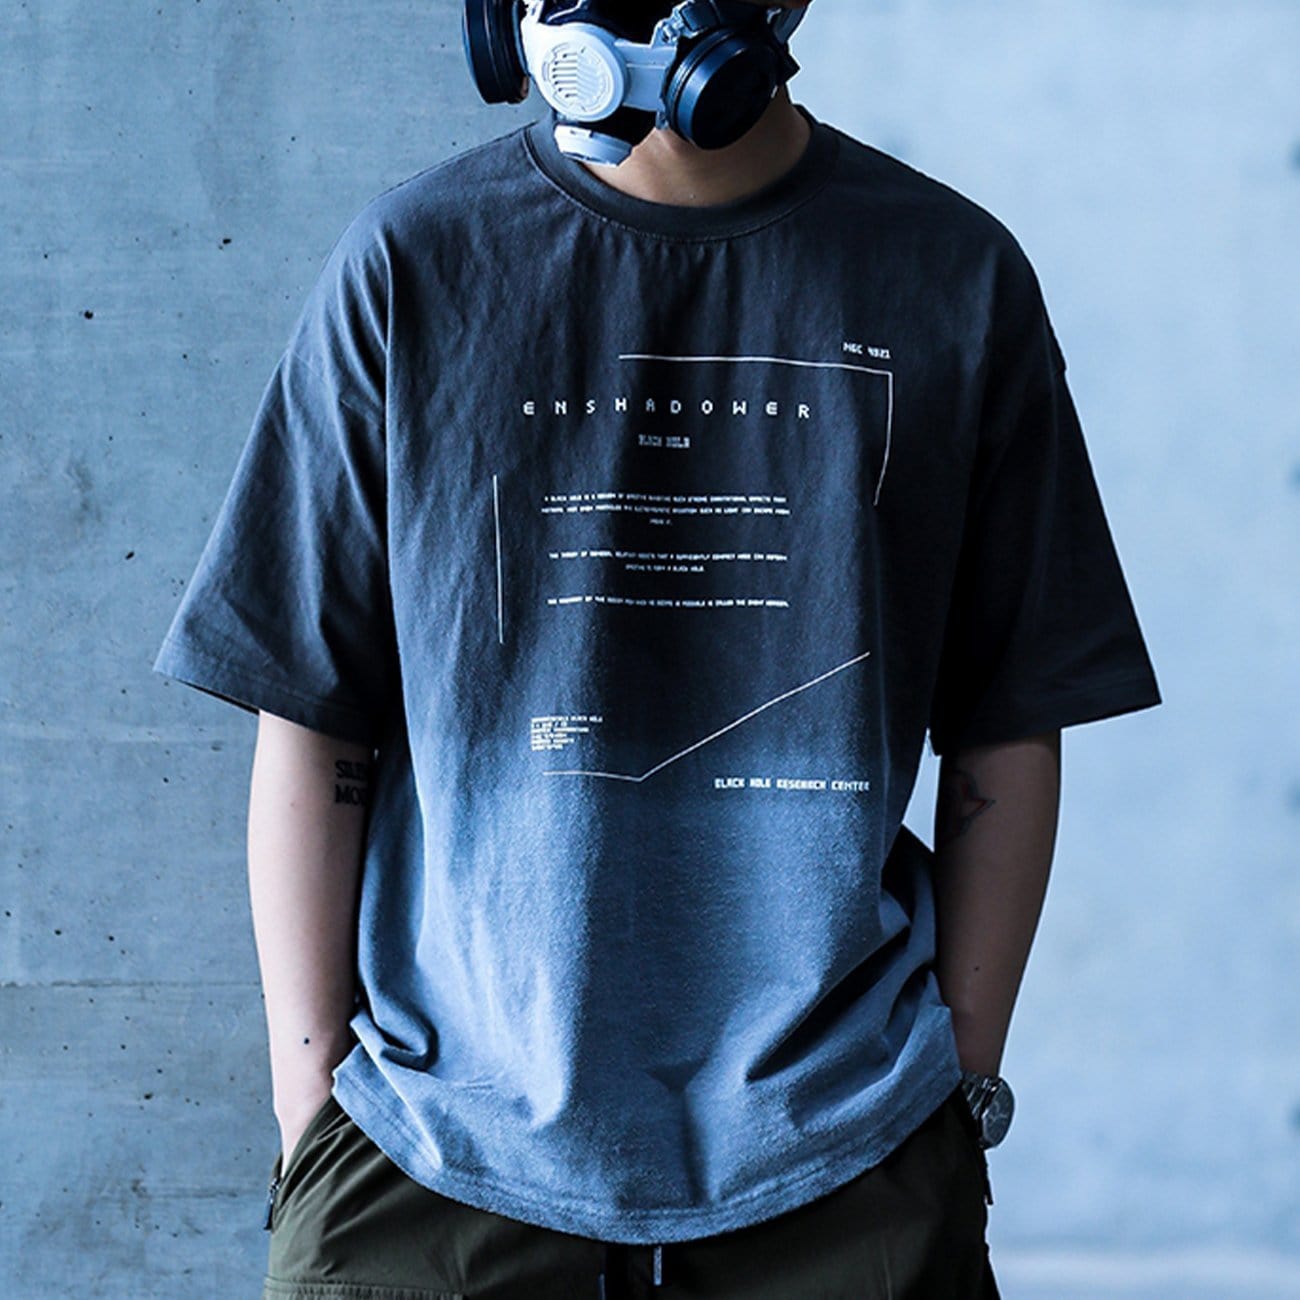 Gradient Letters Cotton Graphic Tee Streetwear Brand Techwear Combat Tactical YUGEN THEORY